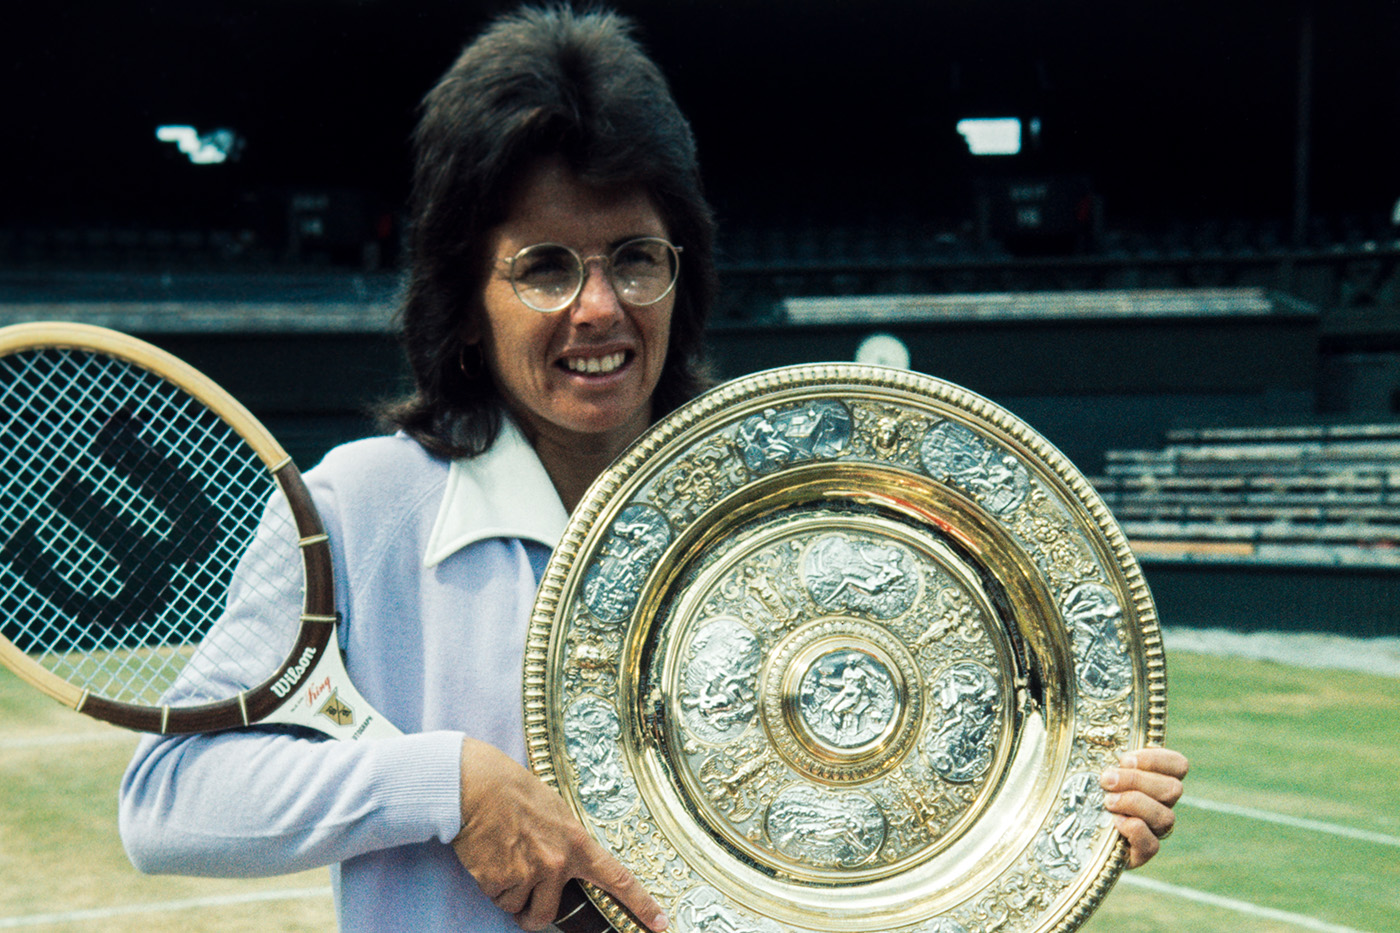 Billie Jean King 2021 - Net Worth, Salary, Records and Endorsements